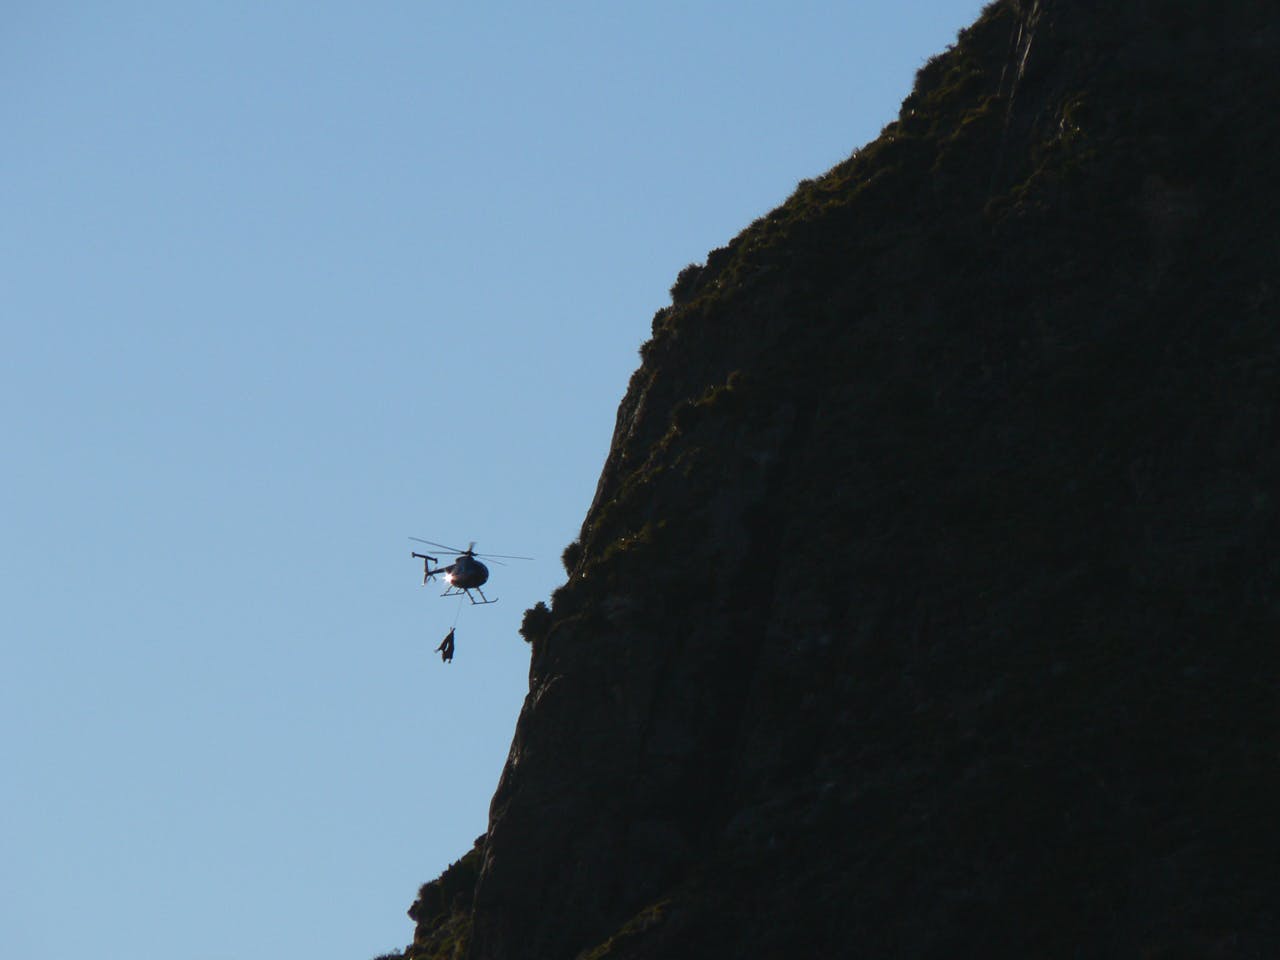 The NZDa says heli-hunting will have detrimental effects on the recreation opportunities of trampers and hunters